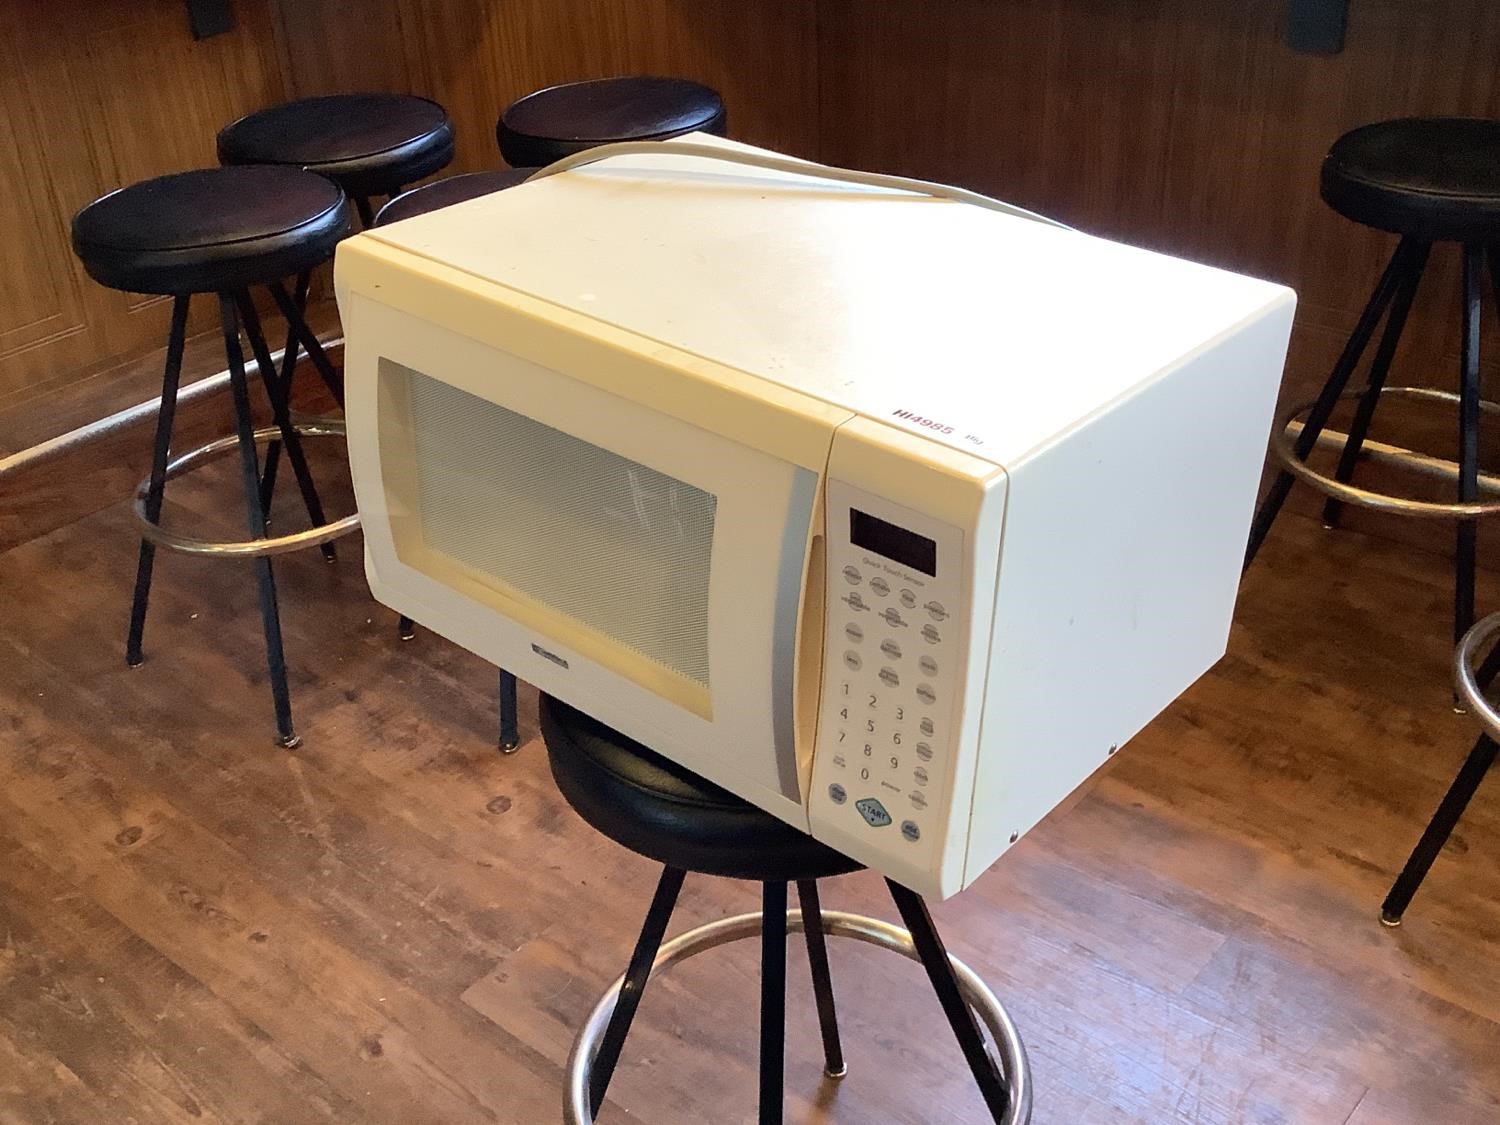 Lot # 22 - Small Kenmore Microwave - (Works) - Adam's Northwest Estate  Sales & Auctions